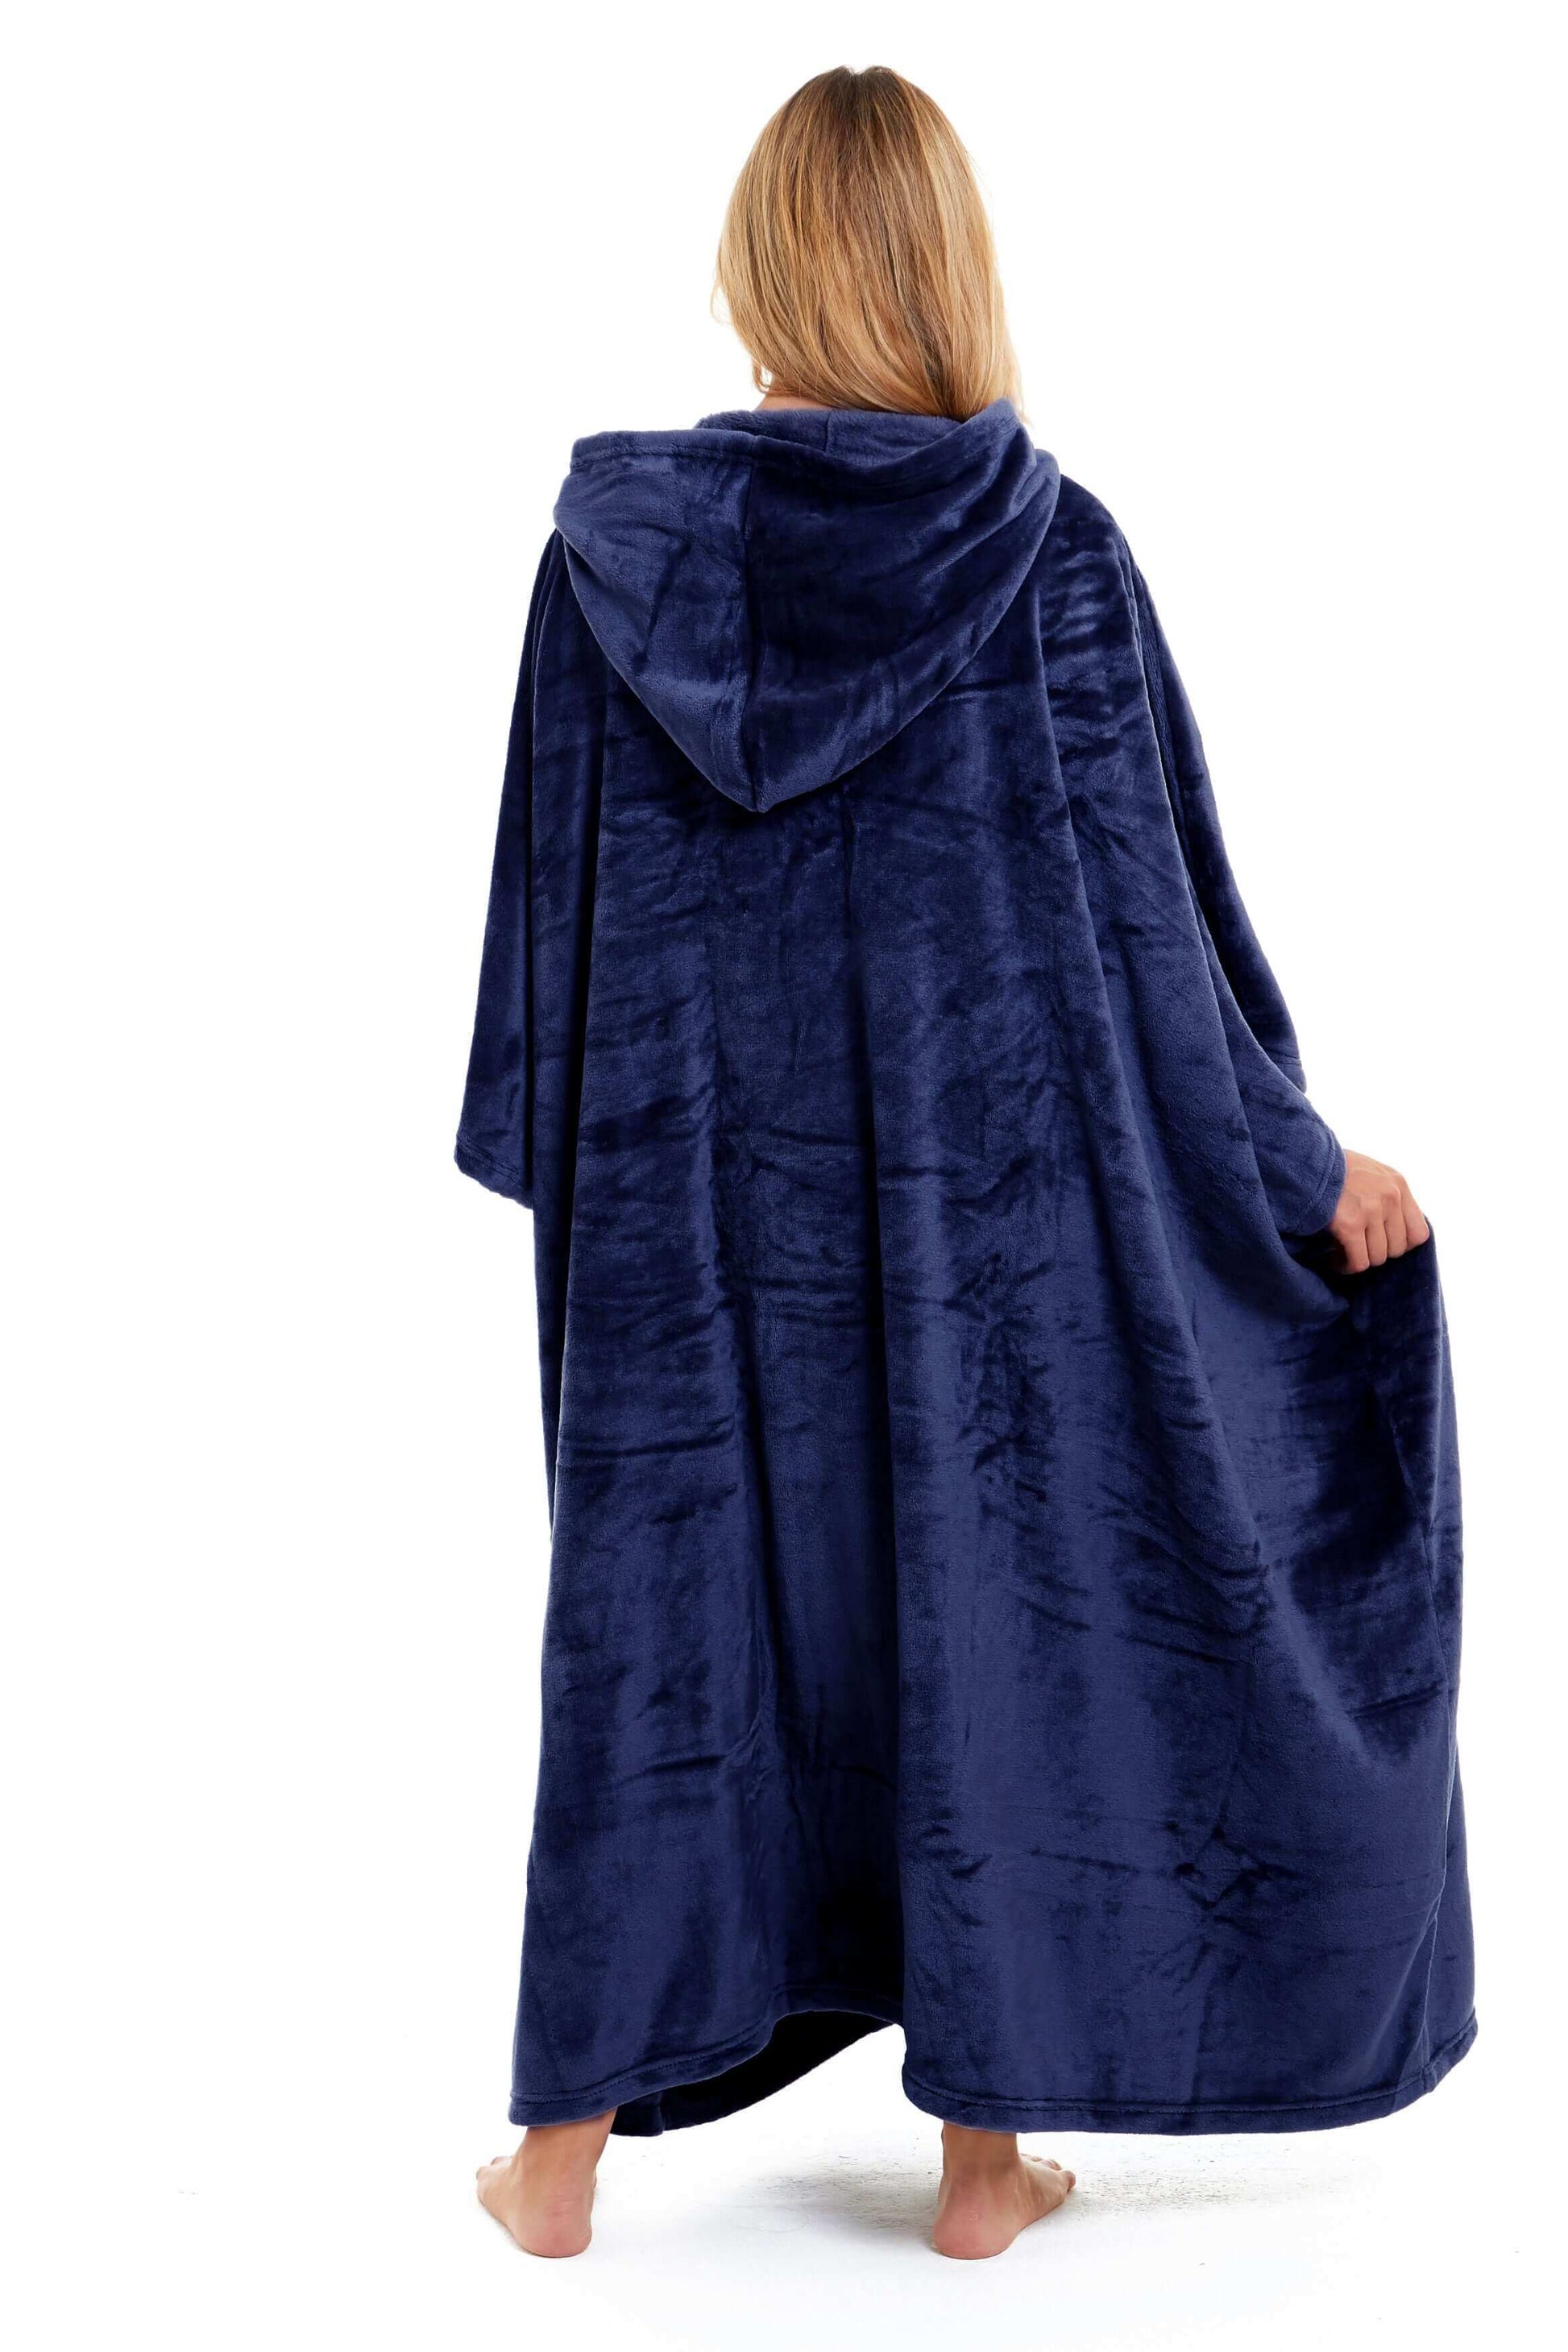 Women's Super Soft Oversized Hooded Poncho Blanket Navy Charcoal Flannel Fleece Cozy Loungewear Nightwear Warm Hoodie One Size Fits Most Adults by Daisy Dreamer. Buy now for £20.00. A Hooded Blanket by Daisy Dreamer. _Hi_chtgptapp_optimised_this_descripti